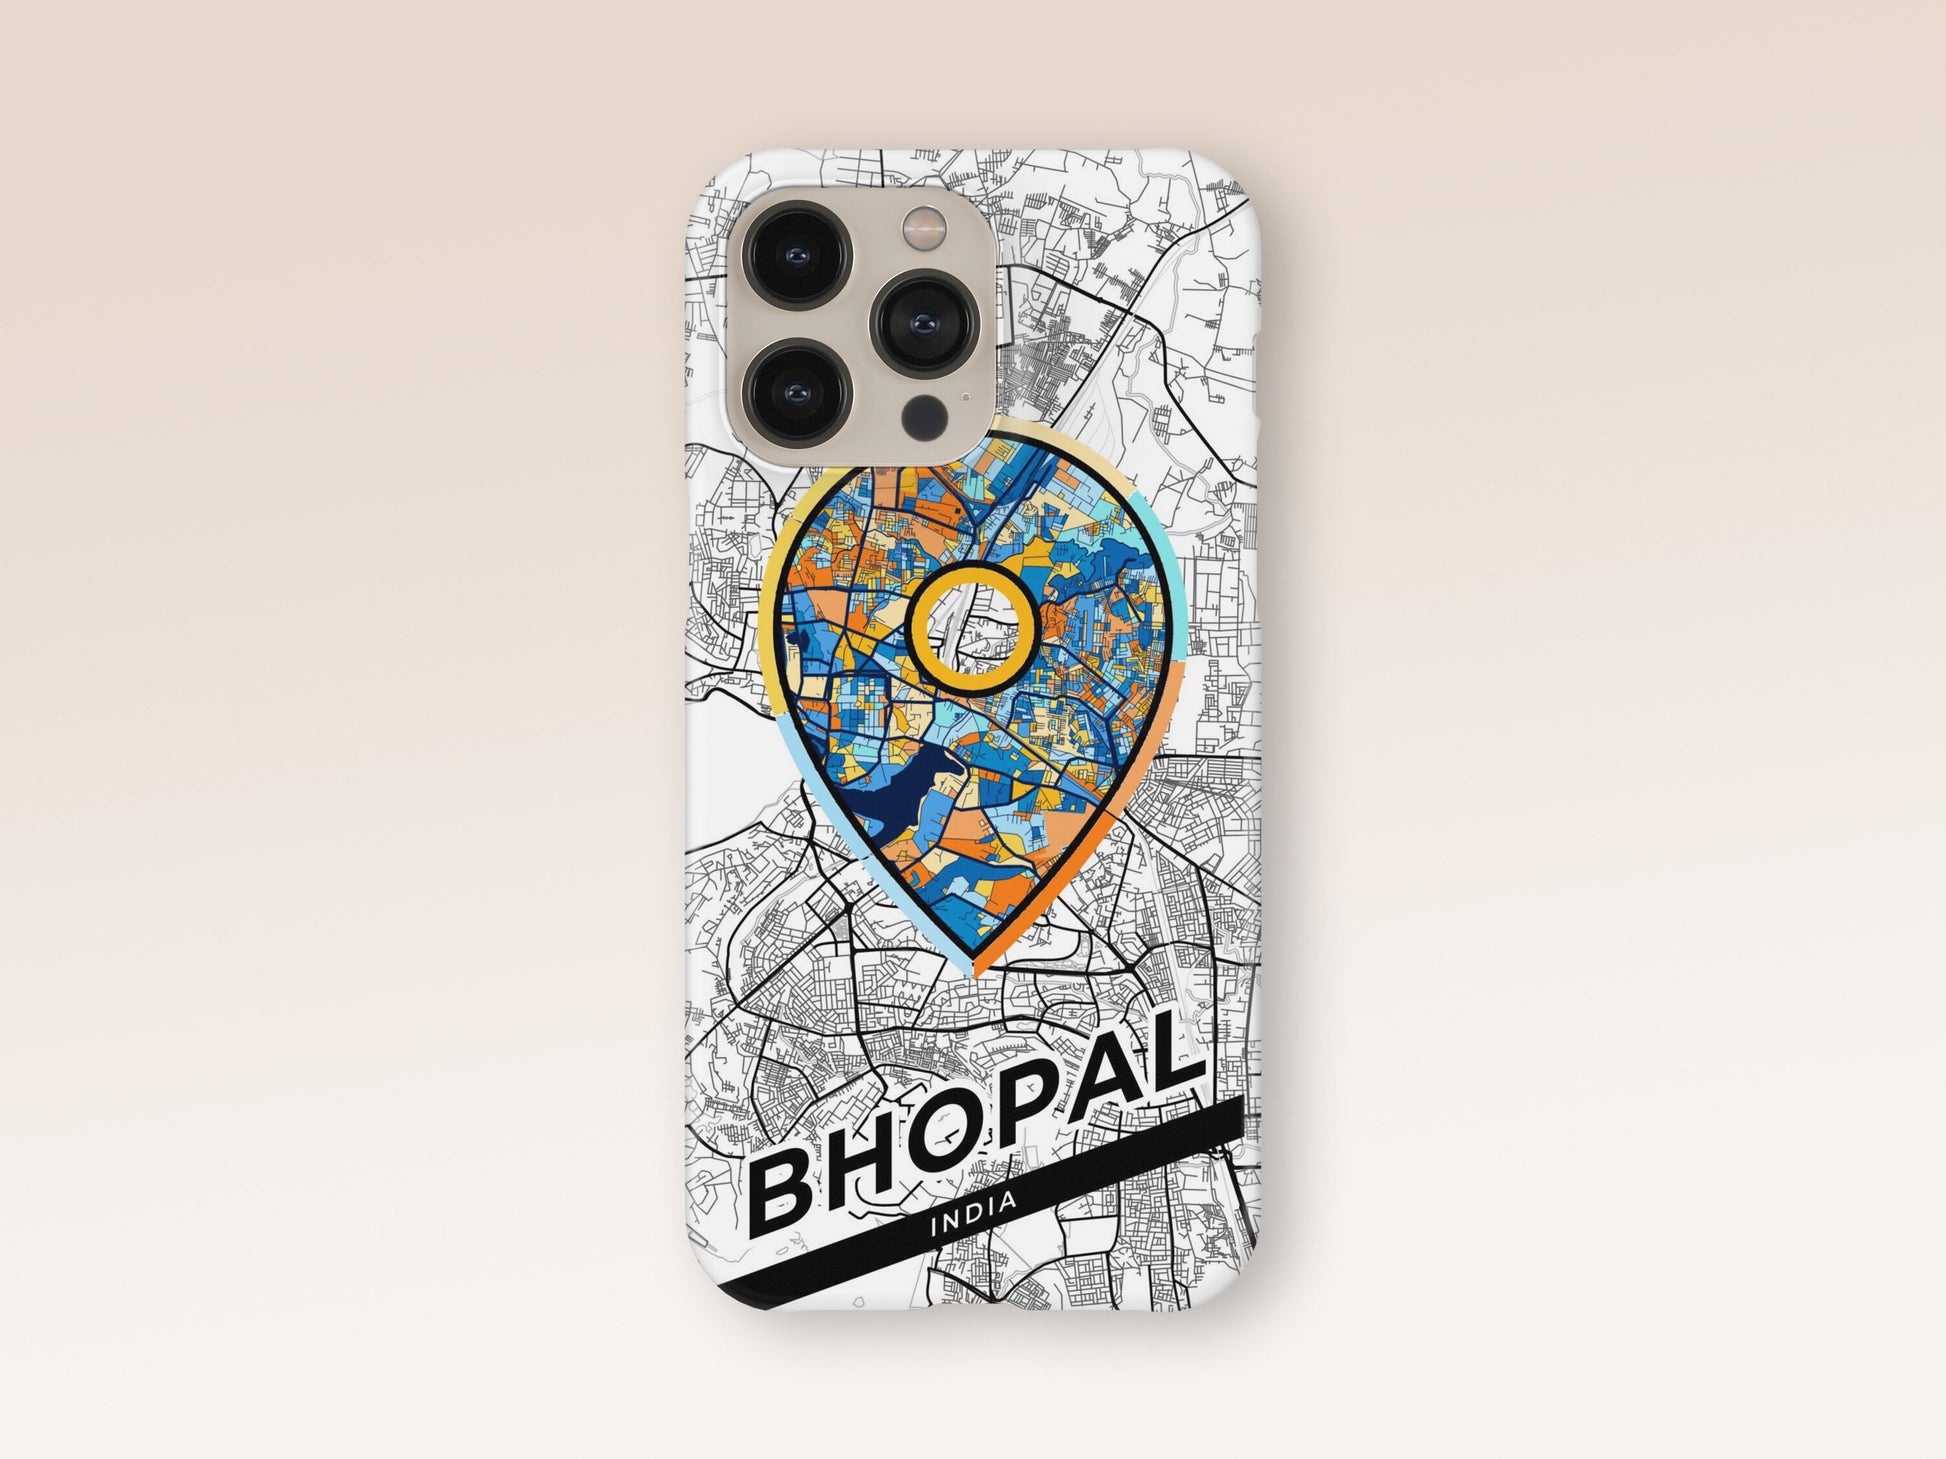 Bhopal India slim phone case with colorful icon. Birthday, wedding or housewarming gift. Couple match cases. 1